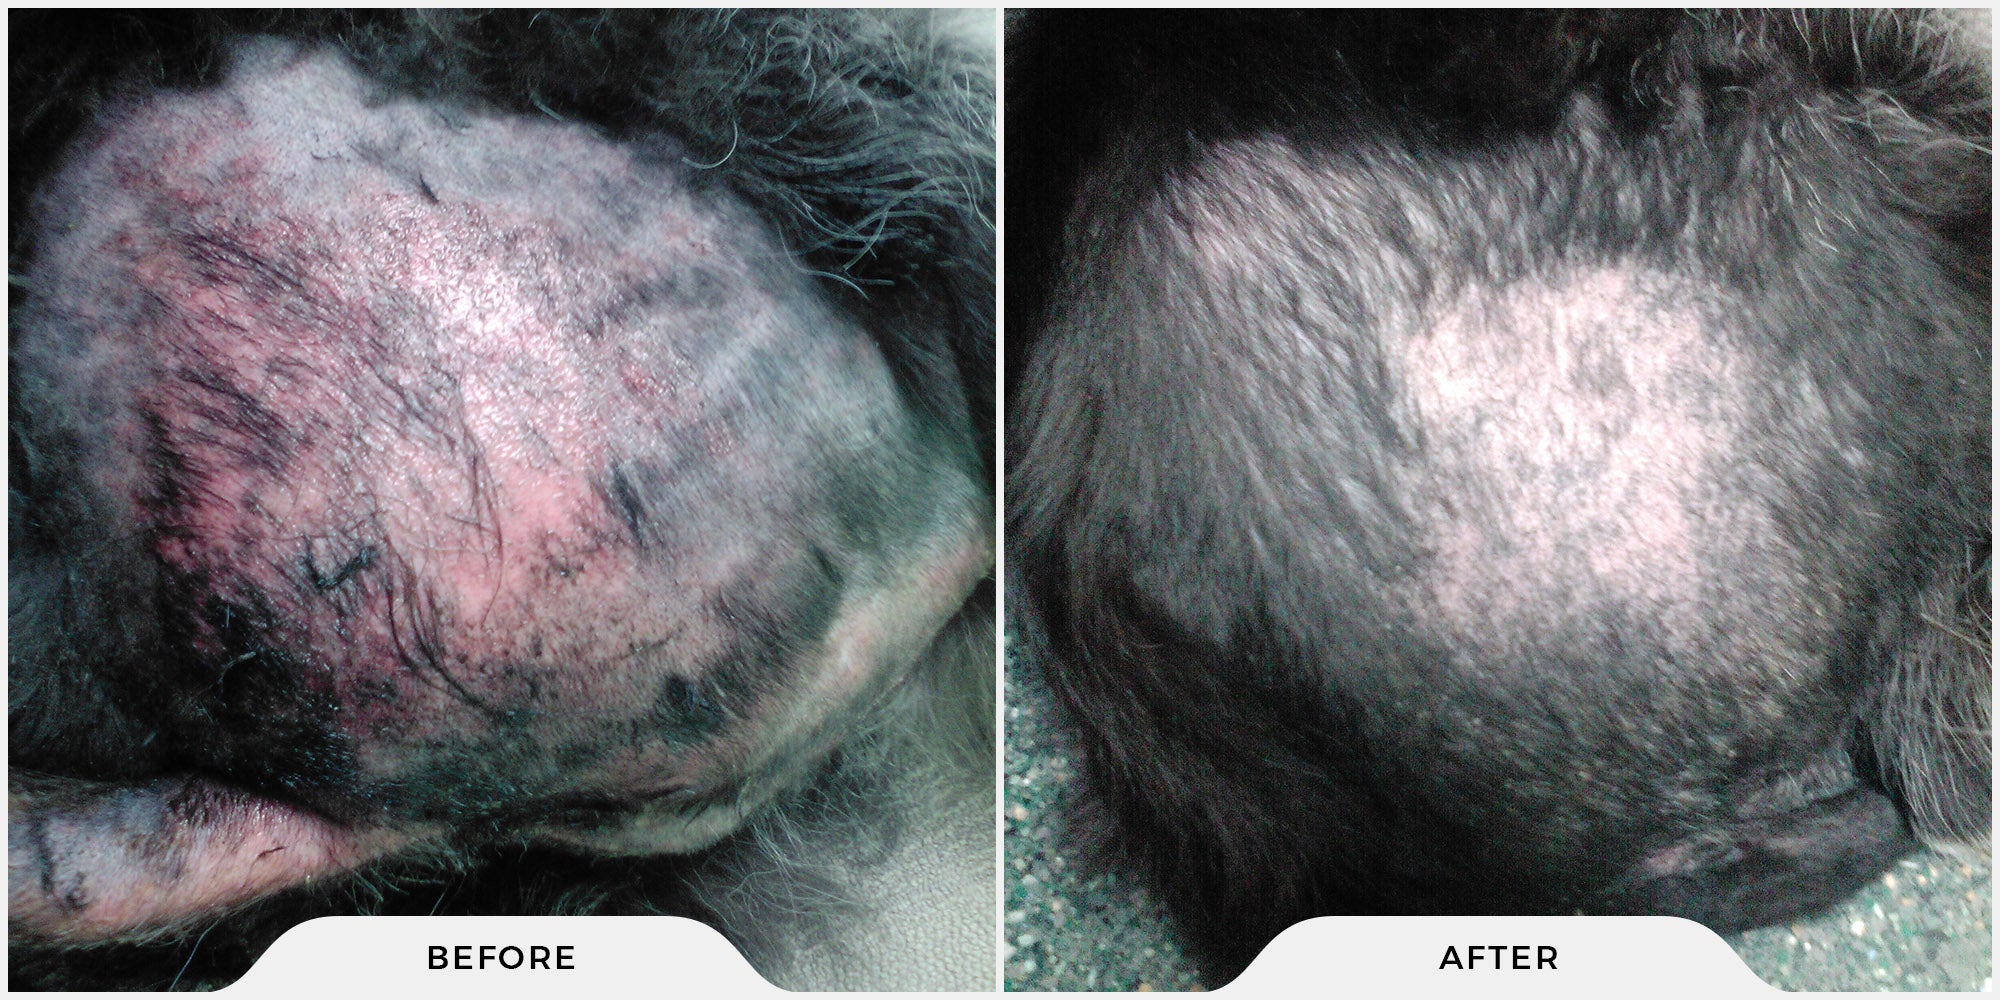 Dog skin condition repair before and after results